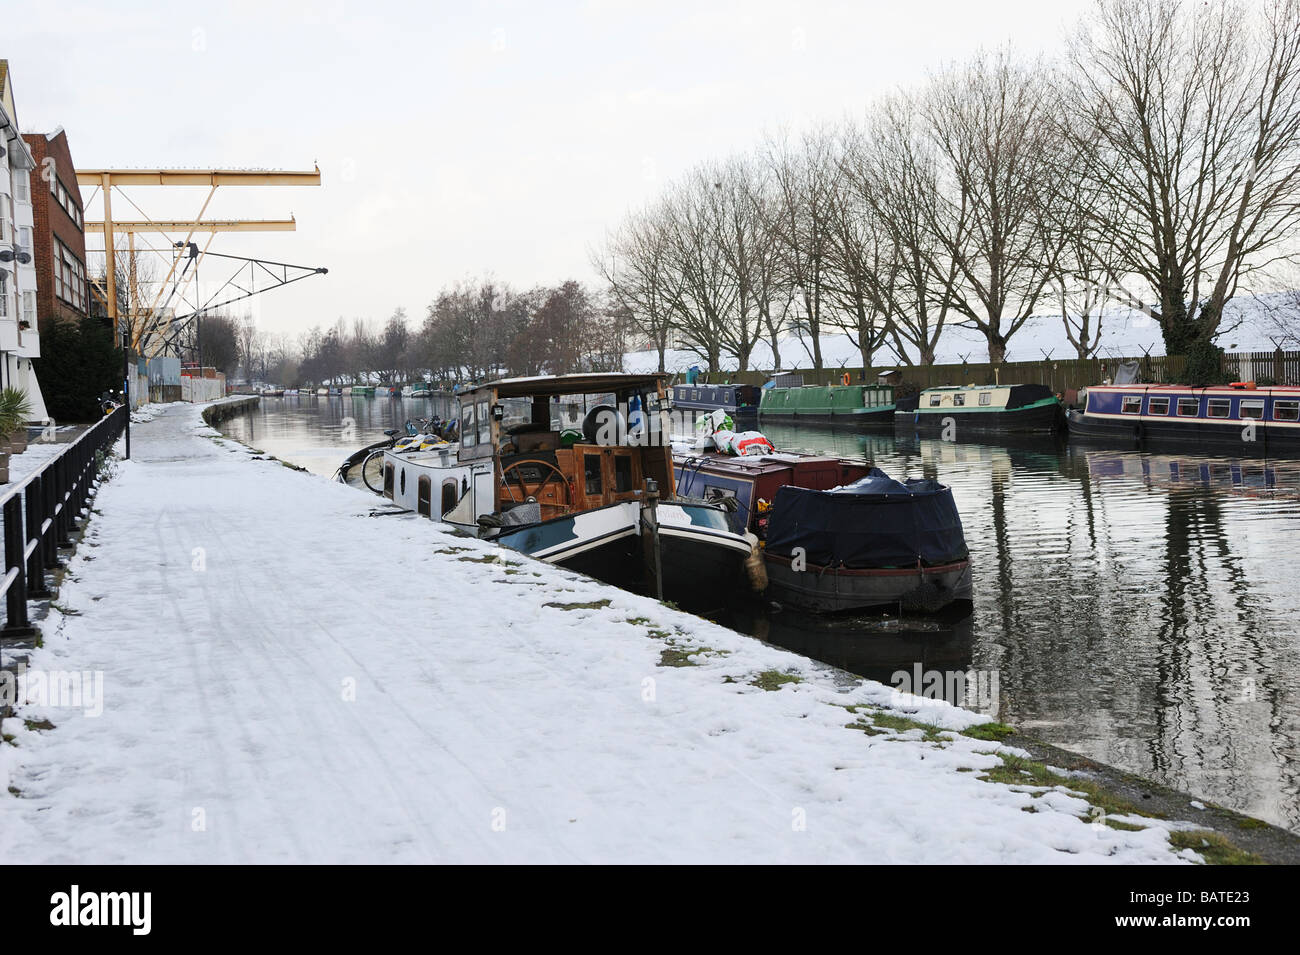 The Lea valley canal with snow covered path and boats,Hackney,London Stock Photo